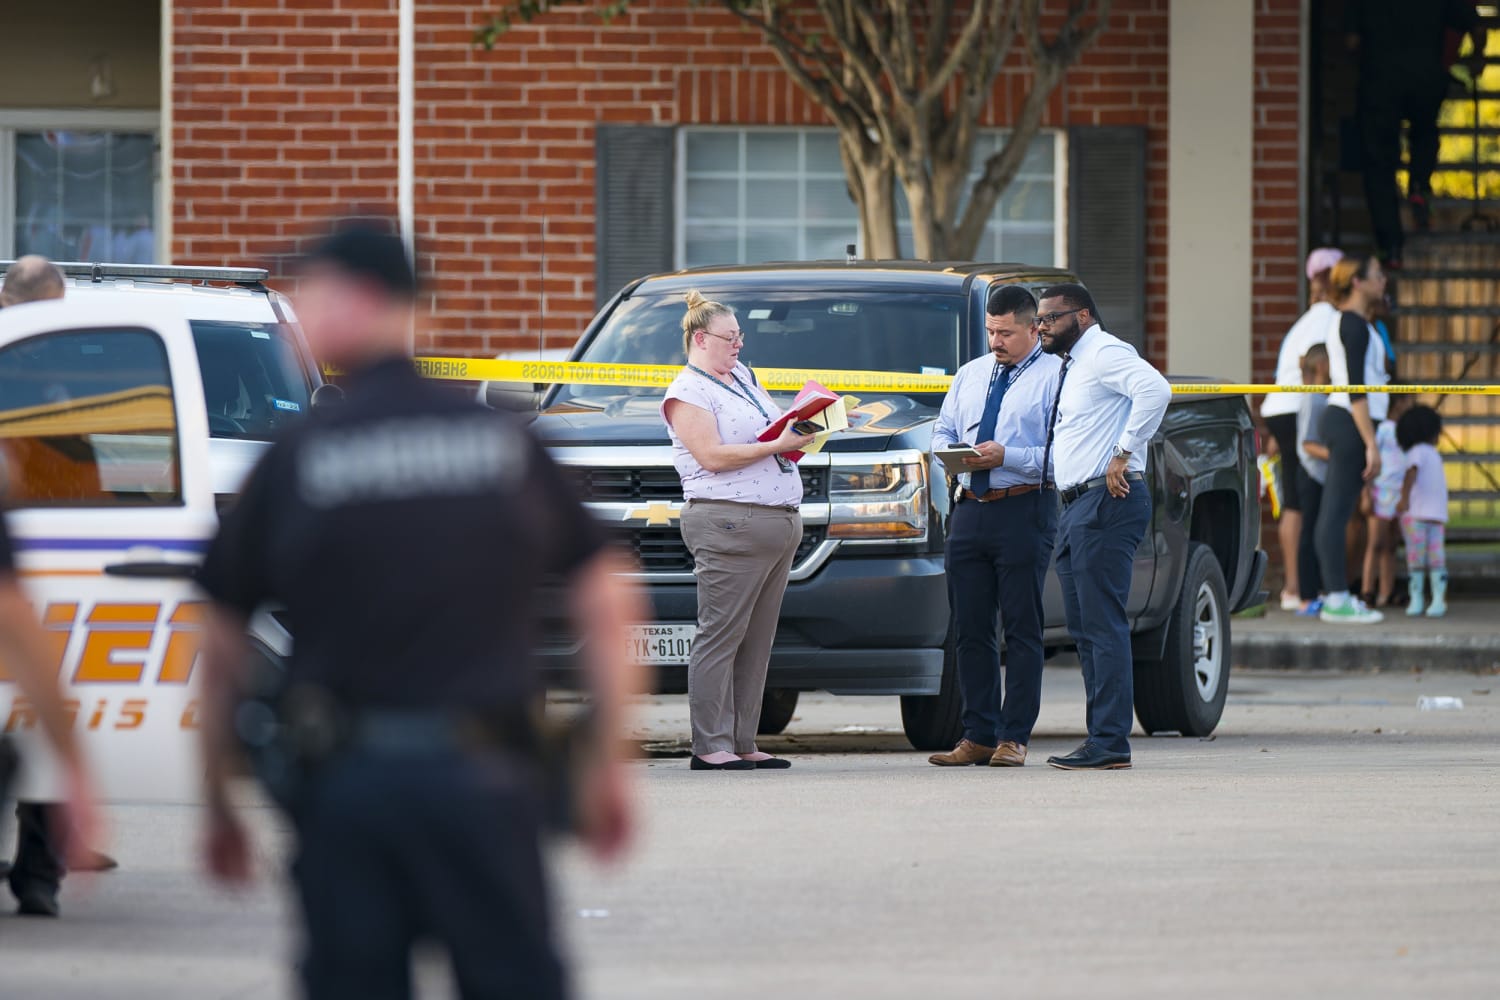 Mother, boyfriend arrested after child’s skeletal remains found in Texas apartment